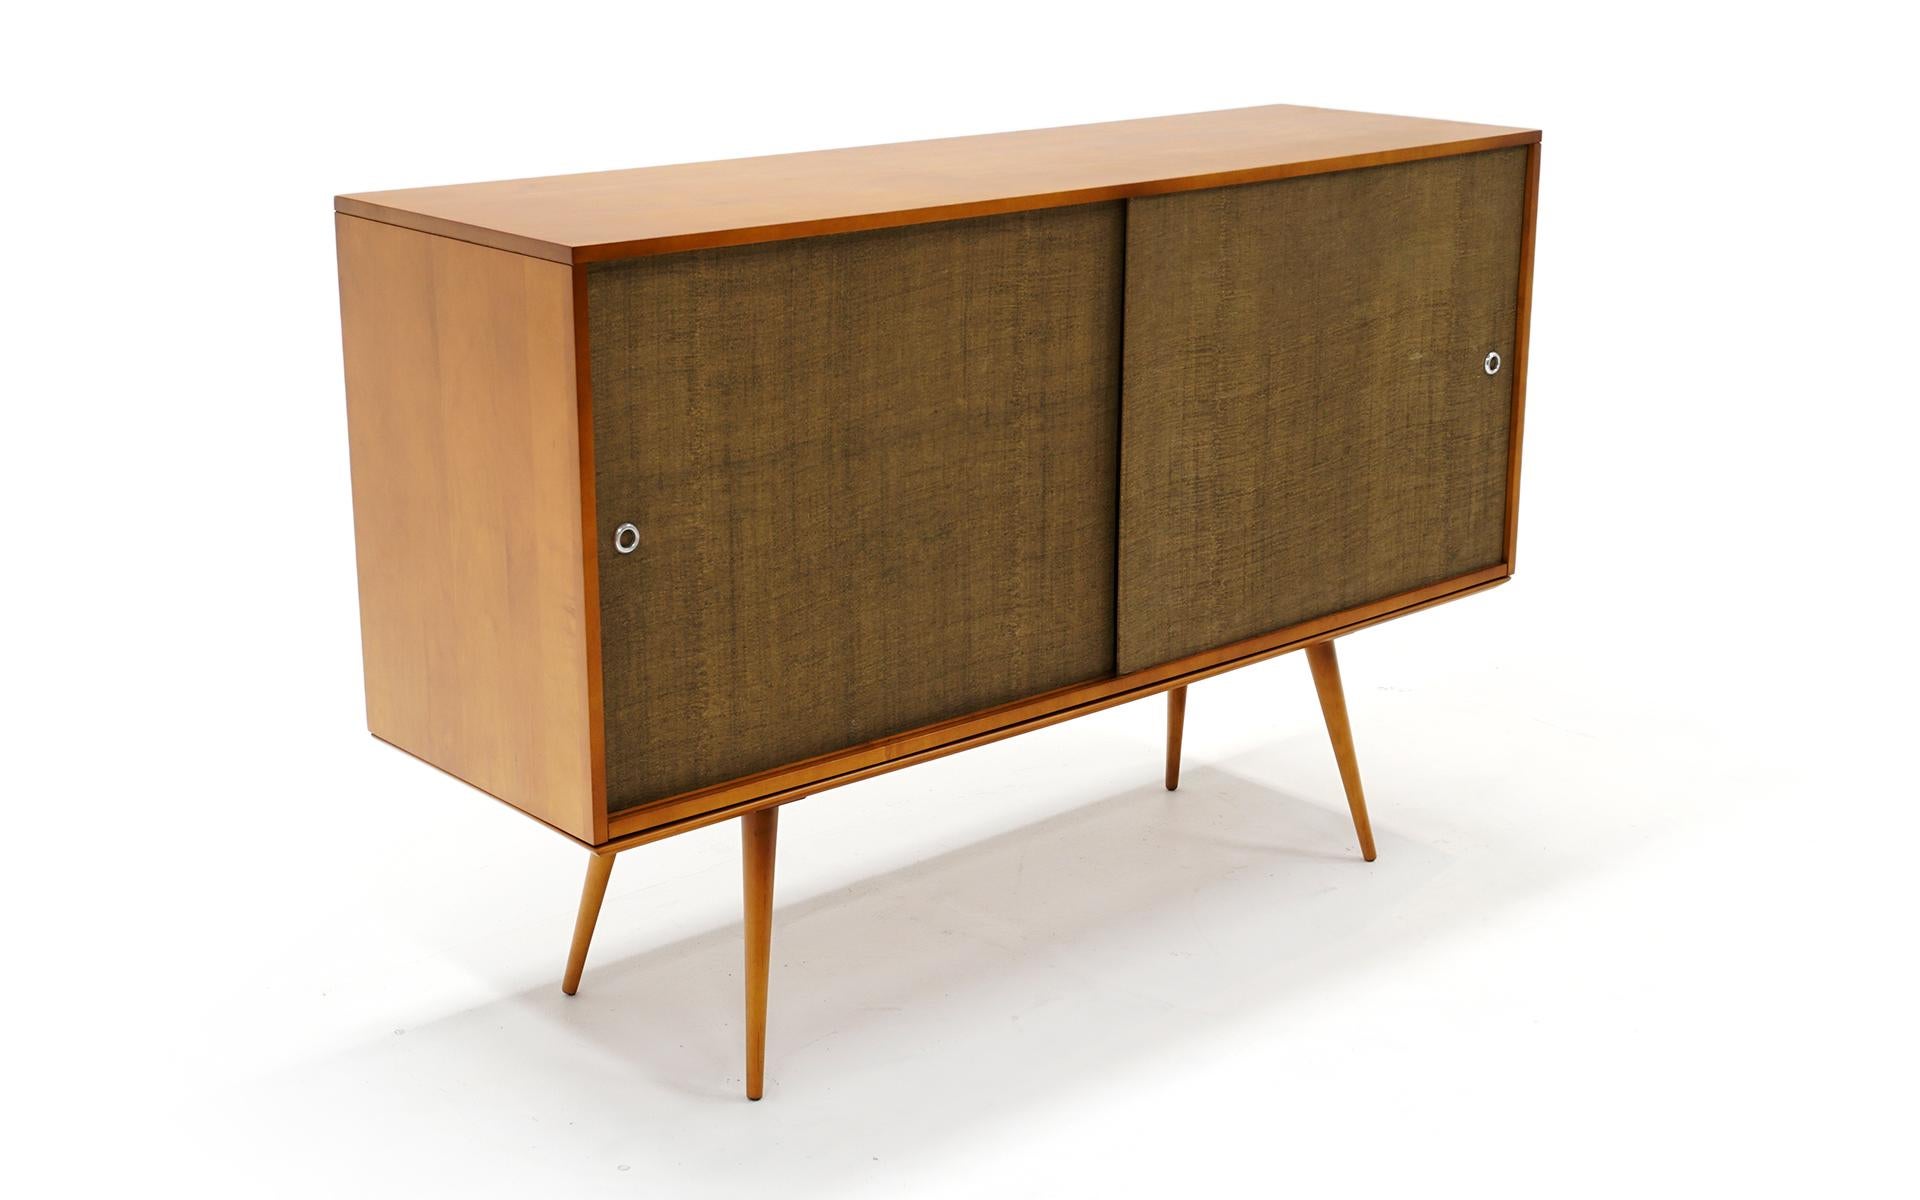 Paul McCobb Planner Group credenza / buffet for Winchendon. Measures: 39 inches tall. Made of solid birch with original grasscloth / grass cloth sliding doors which reveal multiple drawers, shelves and storage spaces. The cabinet sits on a 15 inch